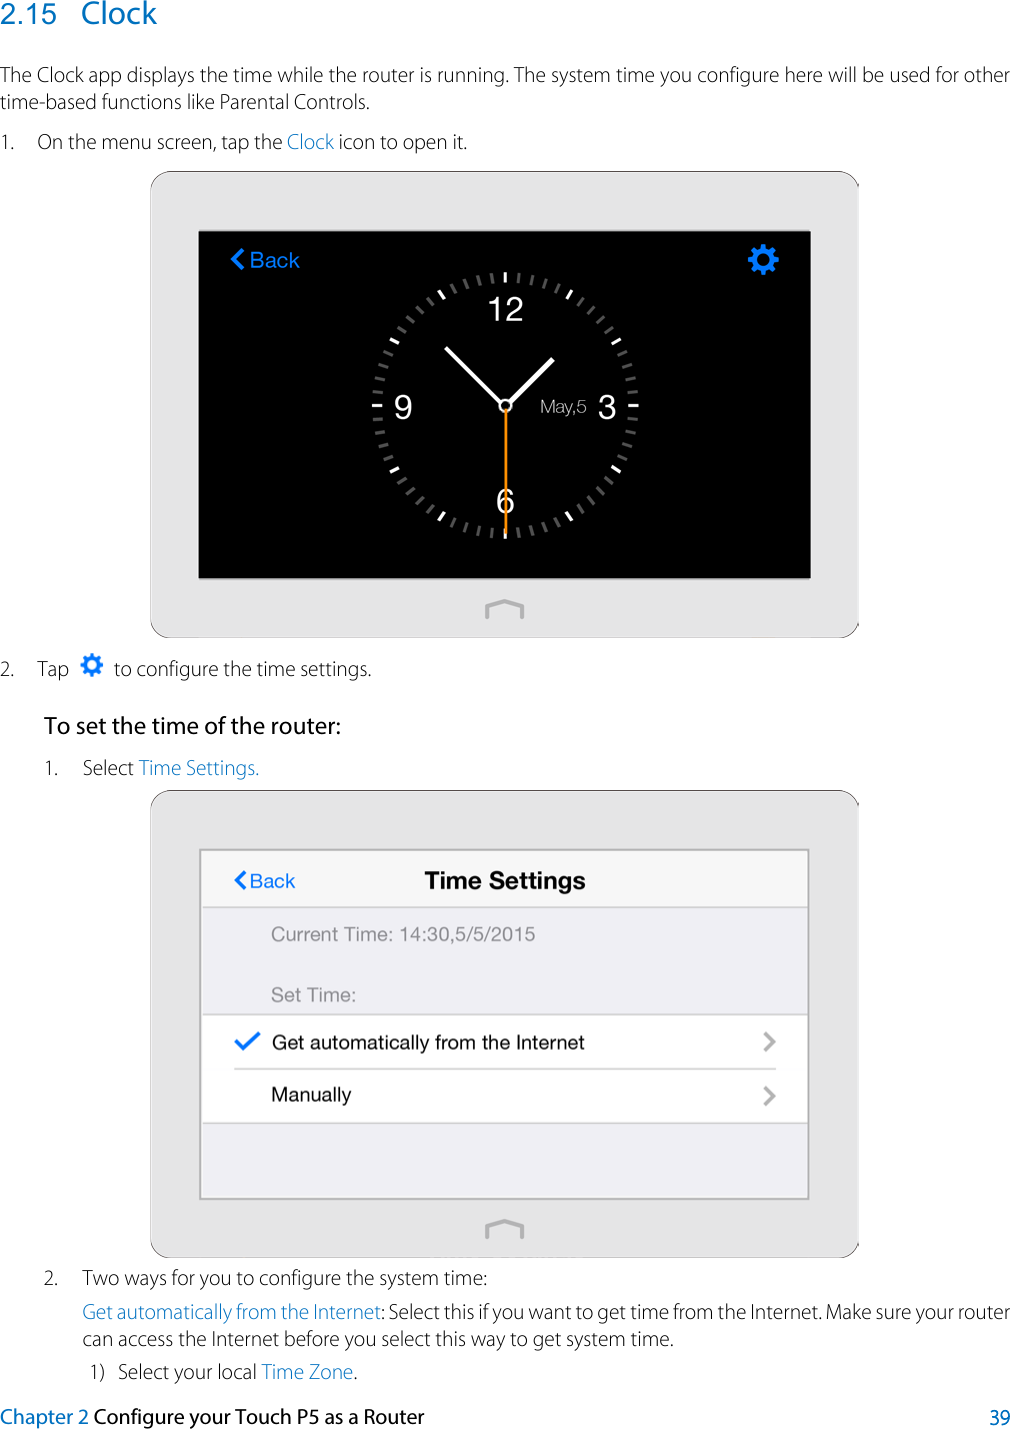  2.15 Clock The Clock app displays the time while the router is running. The system time you configure here will be used for other time-based functions like Parental Controls.   1. On the menu screen, tap the Clock icon to open it.  2. Tap    to configure the time settings. To set the time of the router: 1. Select Time Settings.    2. Two ways for you to configure the system time: Get automatically from the Internet: Select this if you want to get time from the Internet. Make sure your router can access the Internet before you select this way to get system time. 1) Select your local Time Zone. Chapter 2 Configure your Touch P5 as a Router 39 